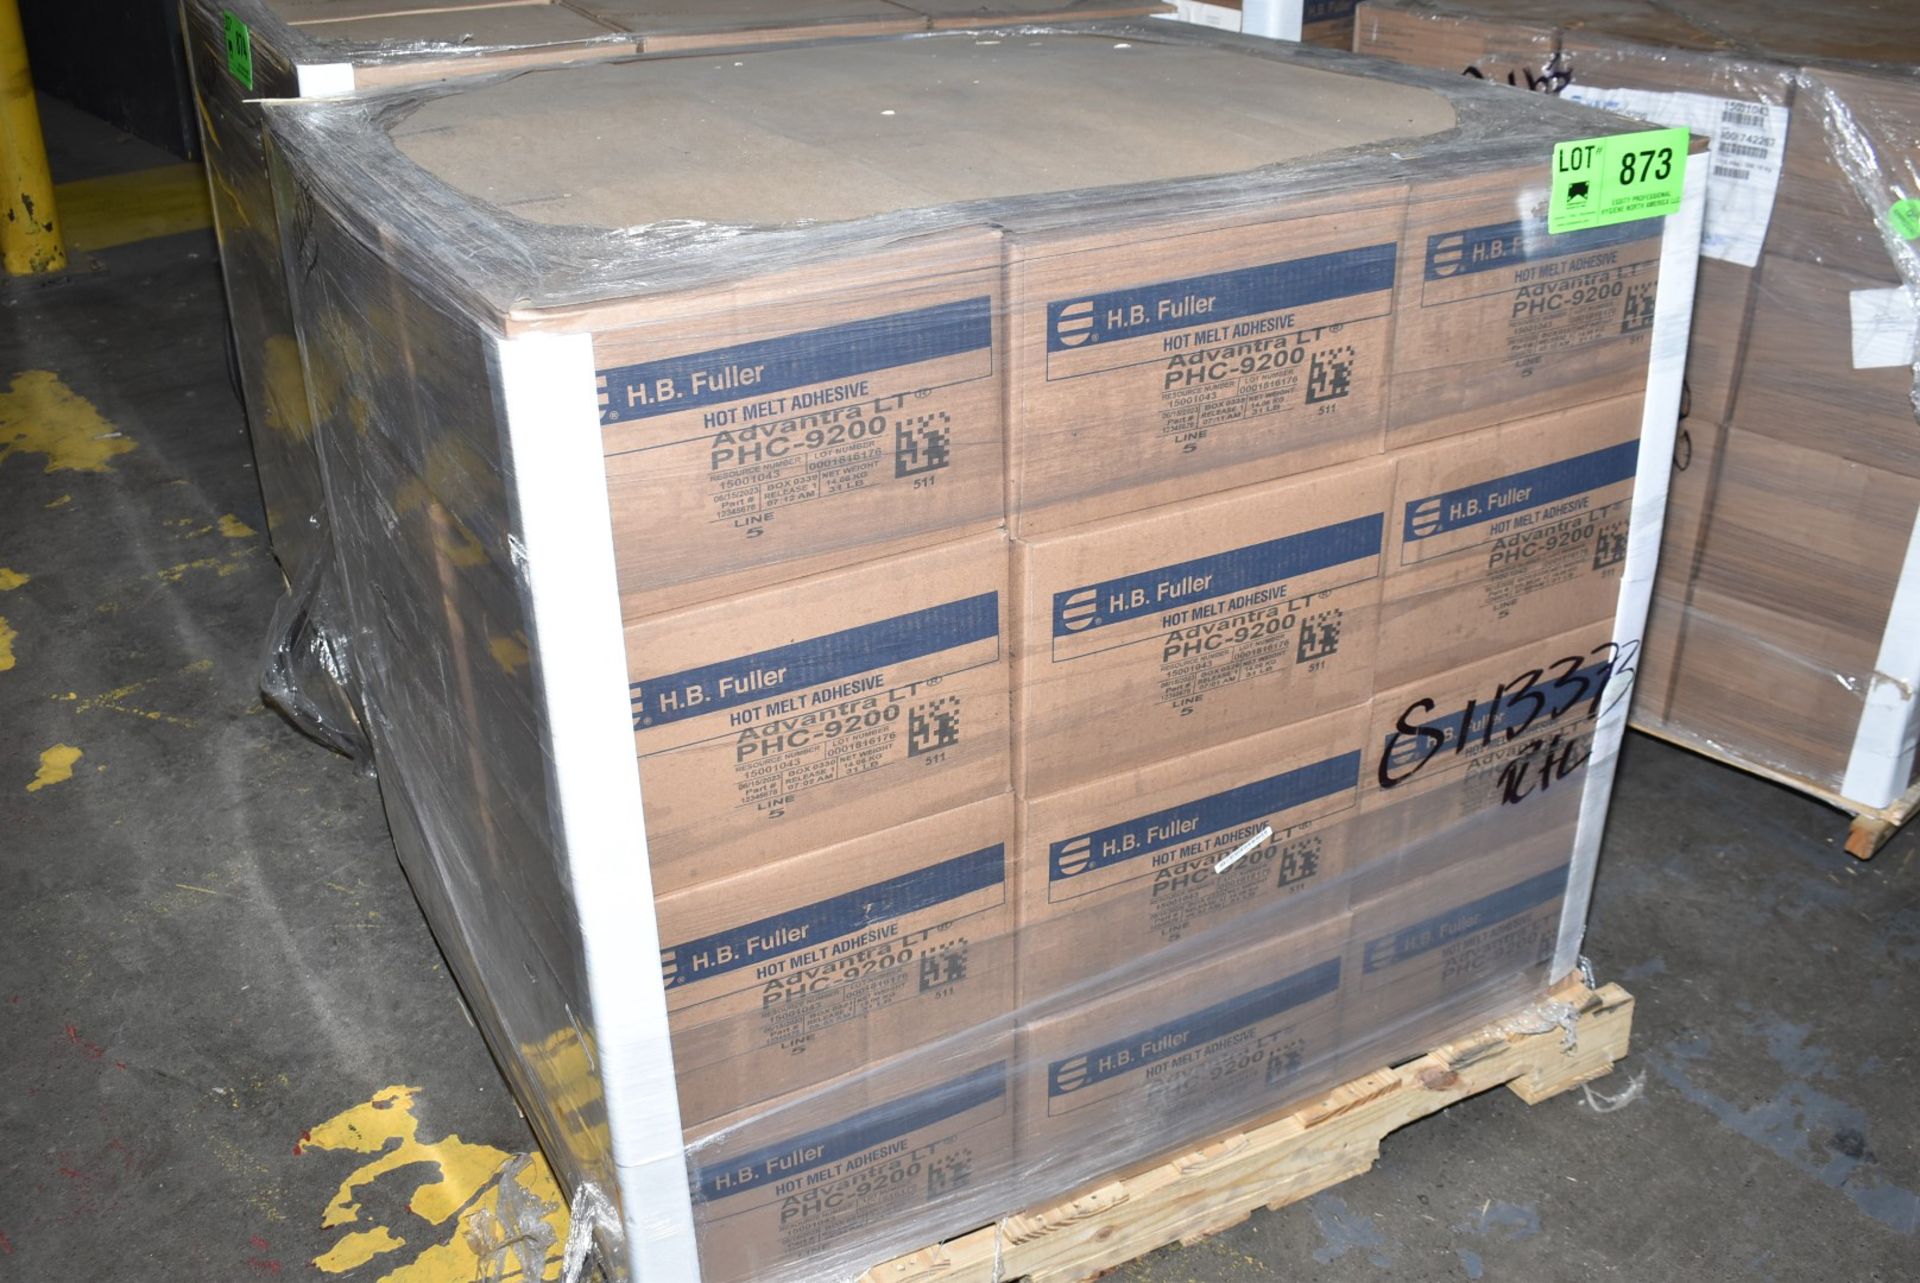 LOT/ PALLET OF ADVANTRA PHC-9200 FOOD PACKAGING ADHESIVE [RIGGING FEE FOR LOT #873 - $25 USD PLUS